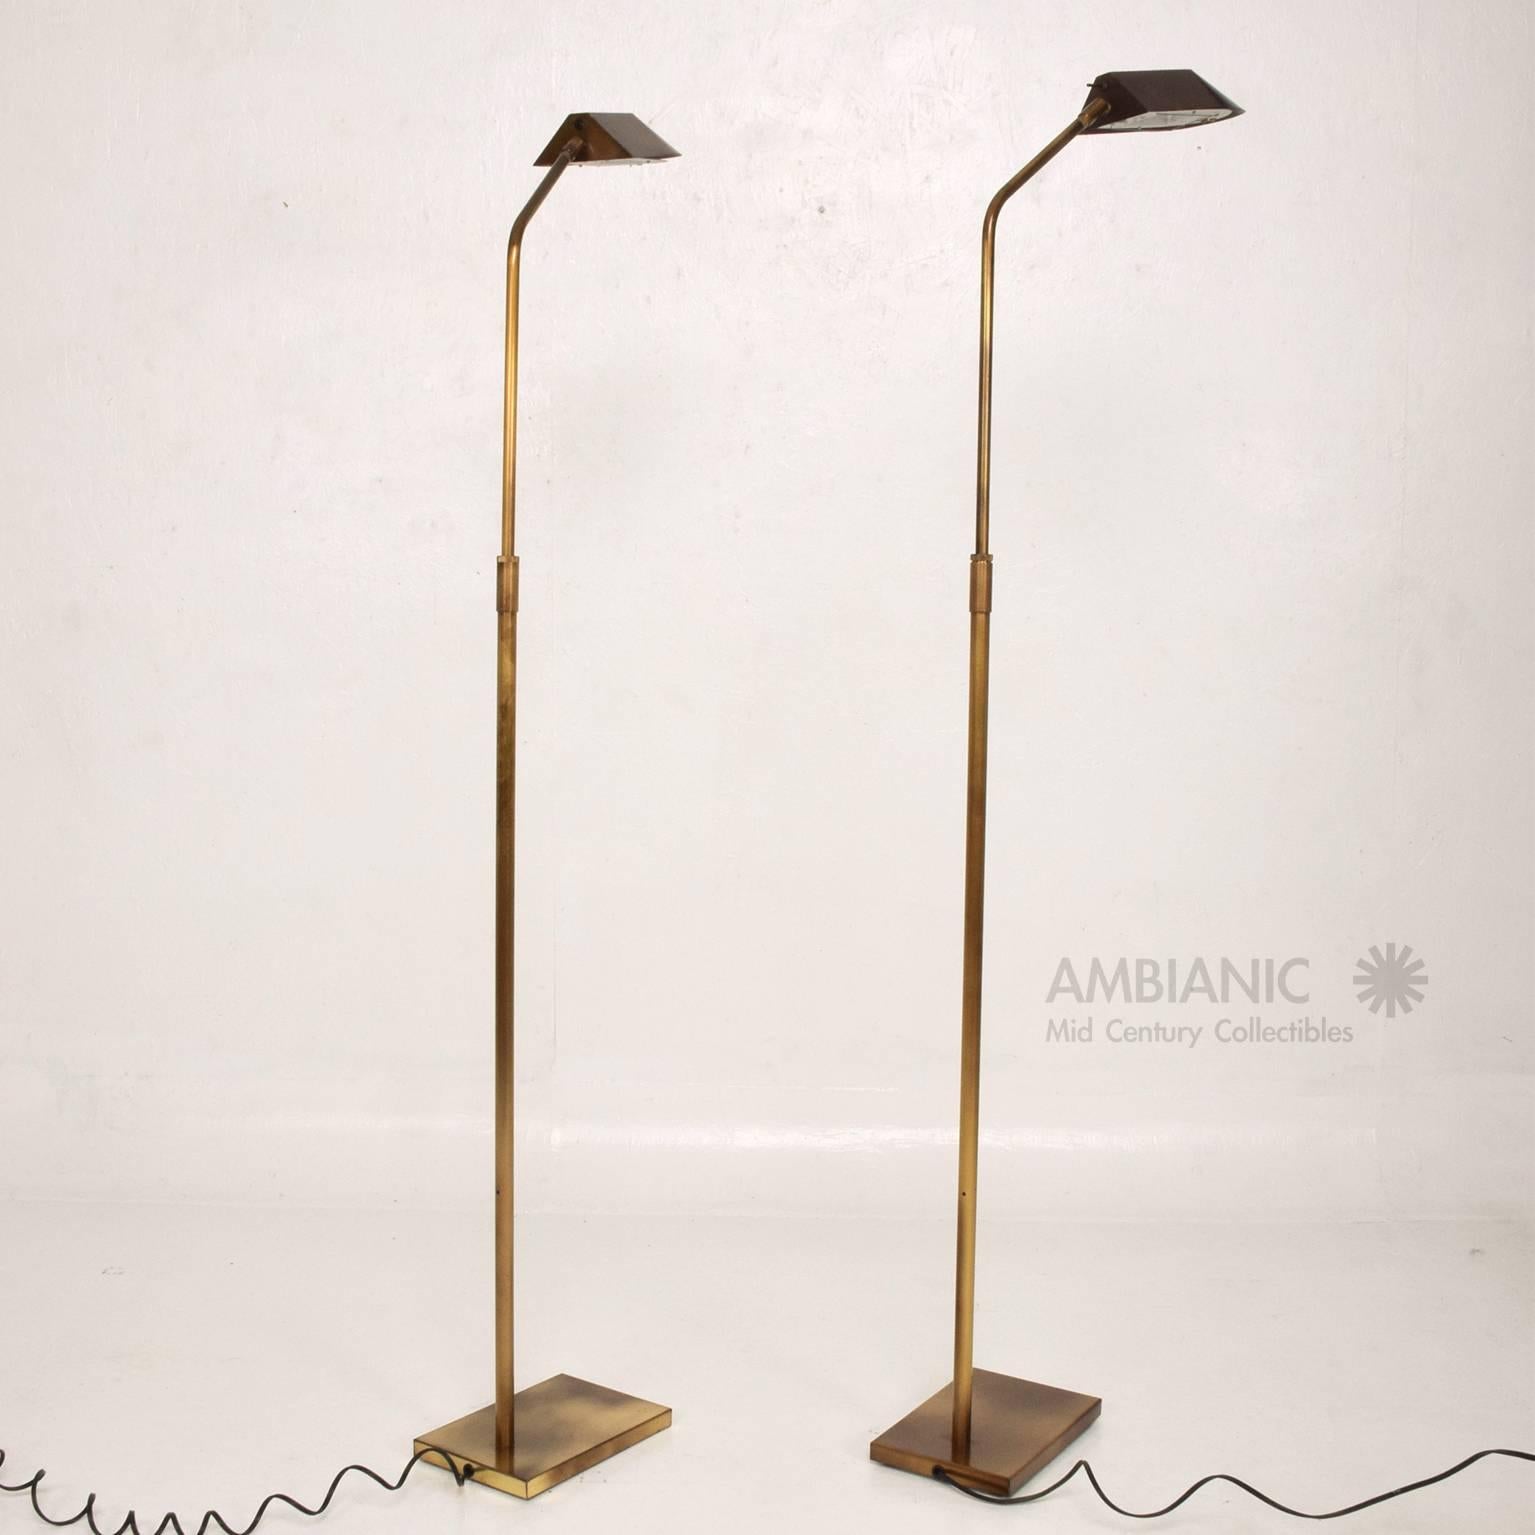 For your consideration a pair of Mid-Century Modern reading lamps by George Kovacs.
Patinated brass.
Stamped with makers label underneath. 
56 1/2